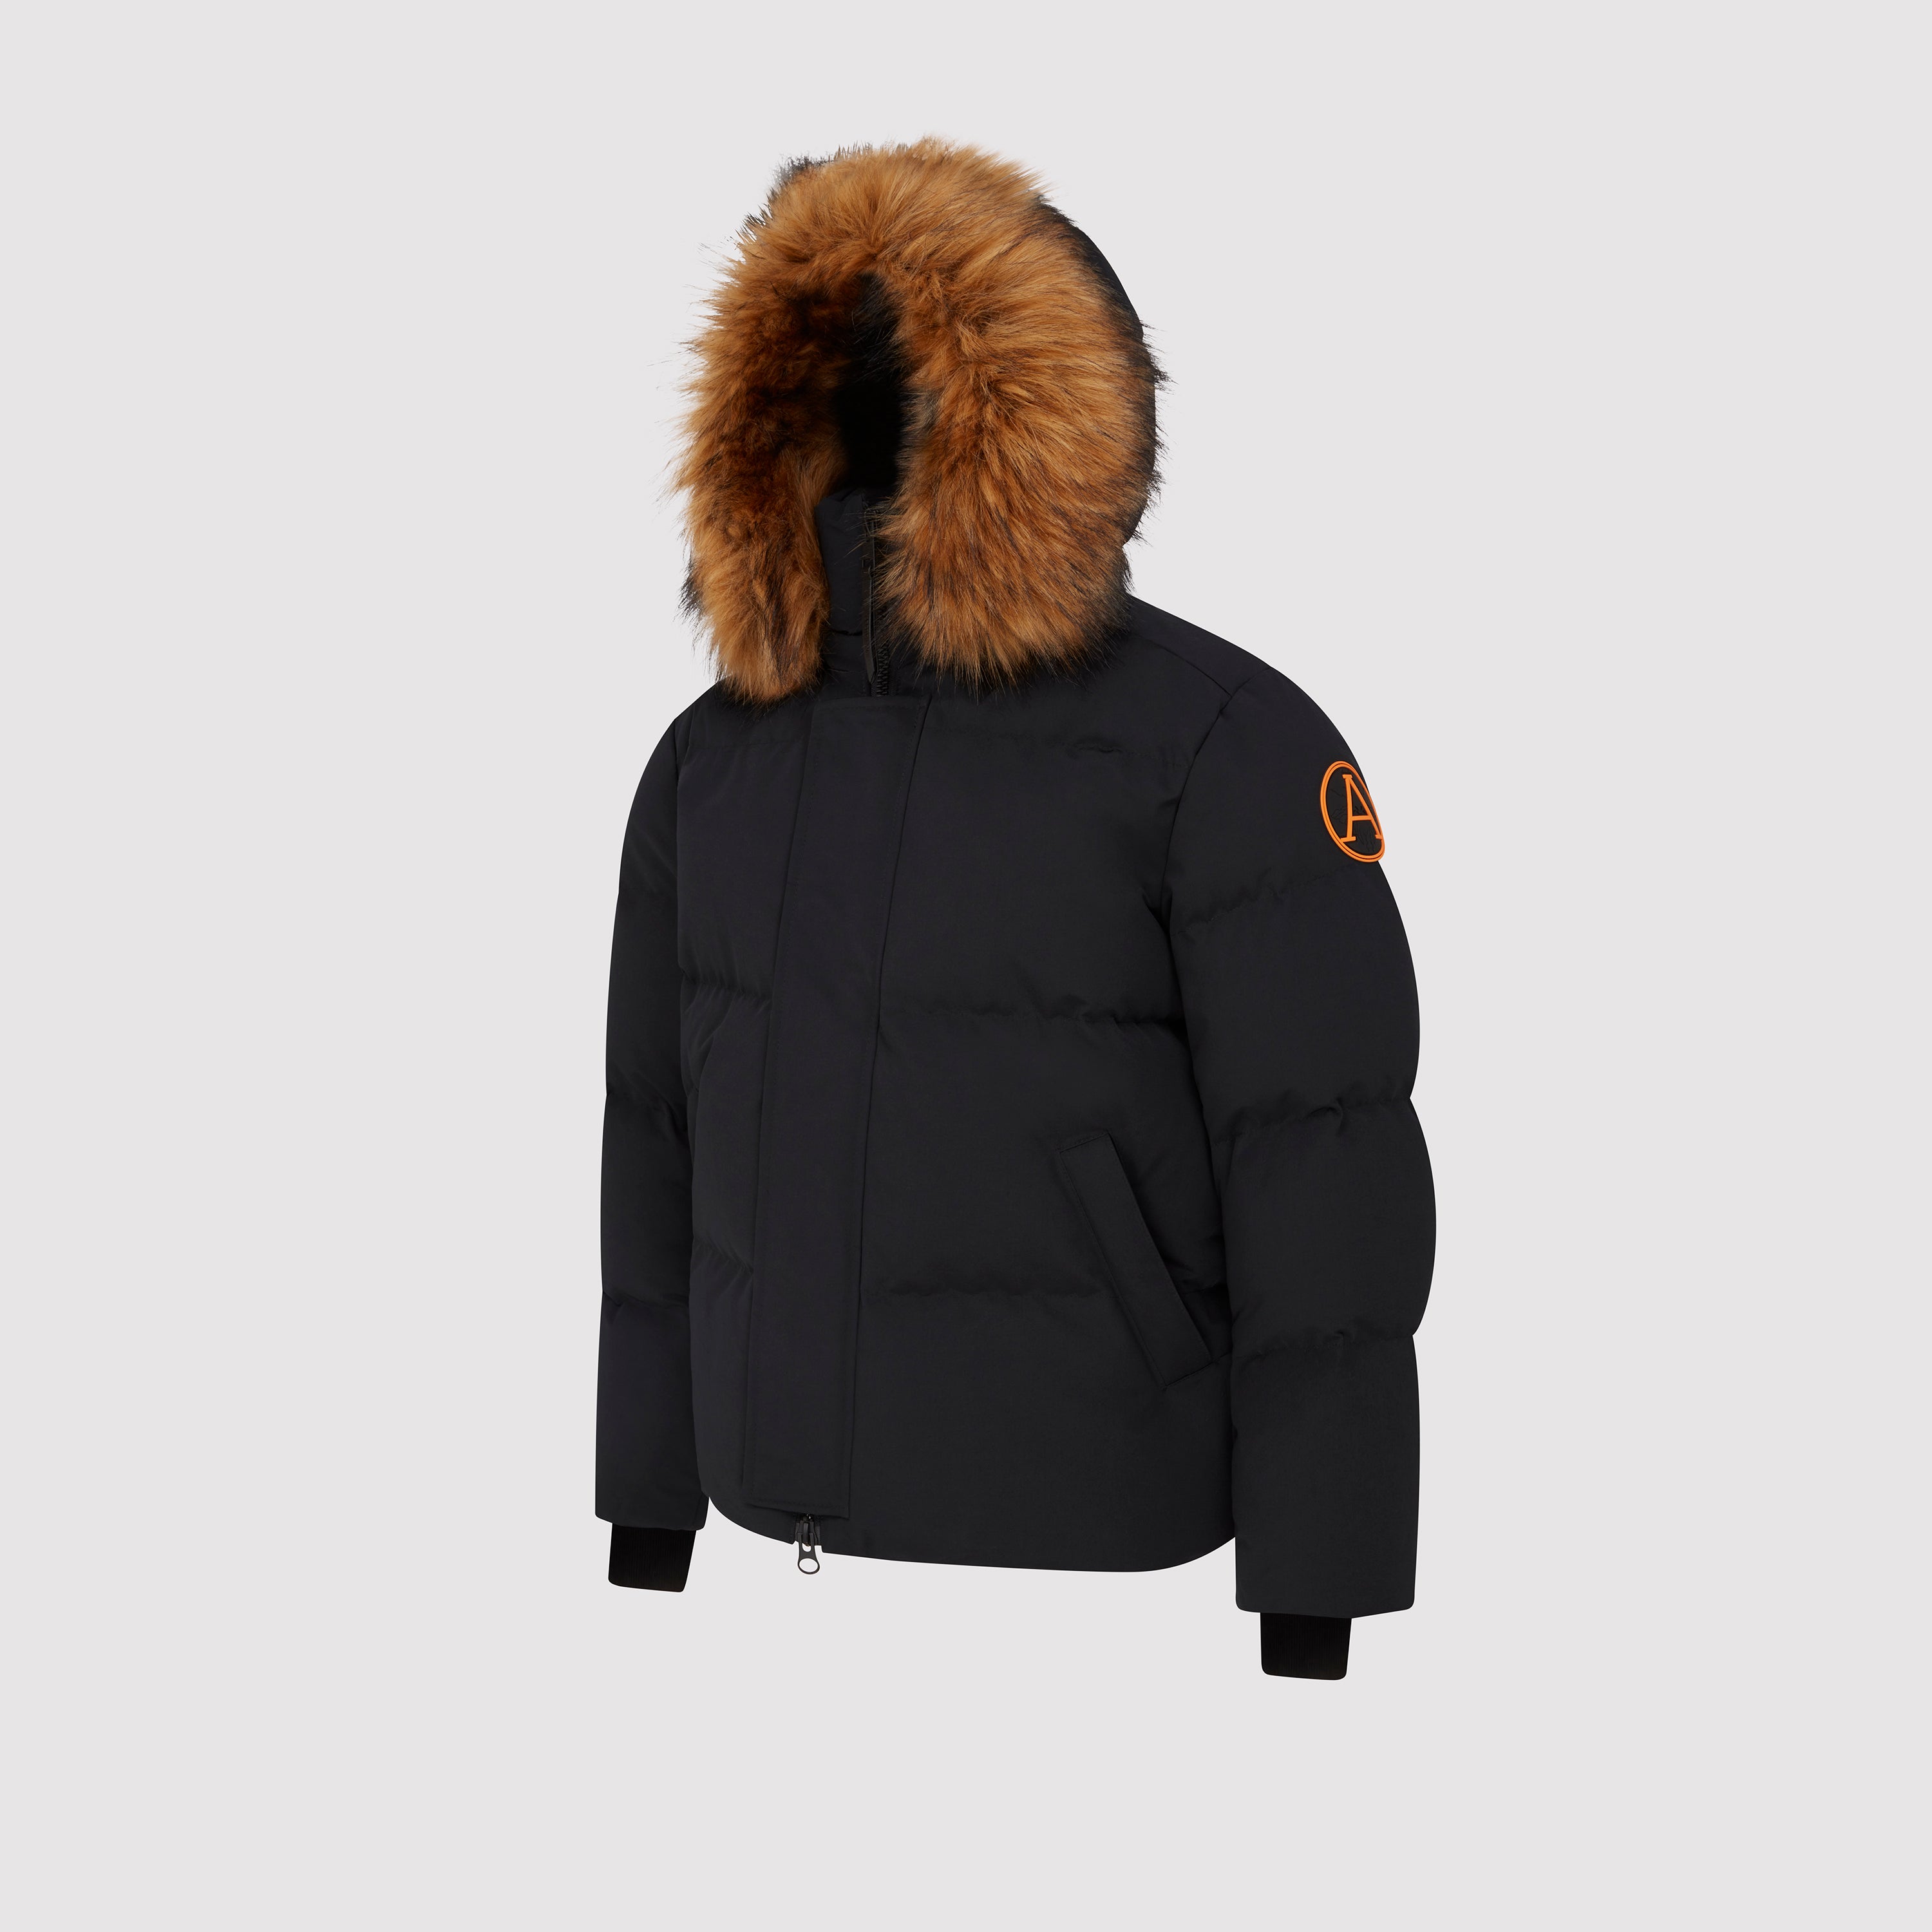 Arctic Army | The Ultimate in Luxury Fashion Outerwear